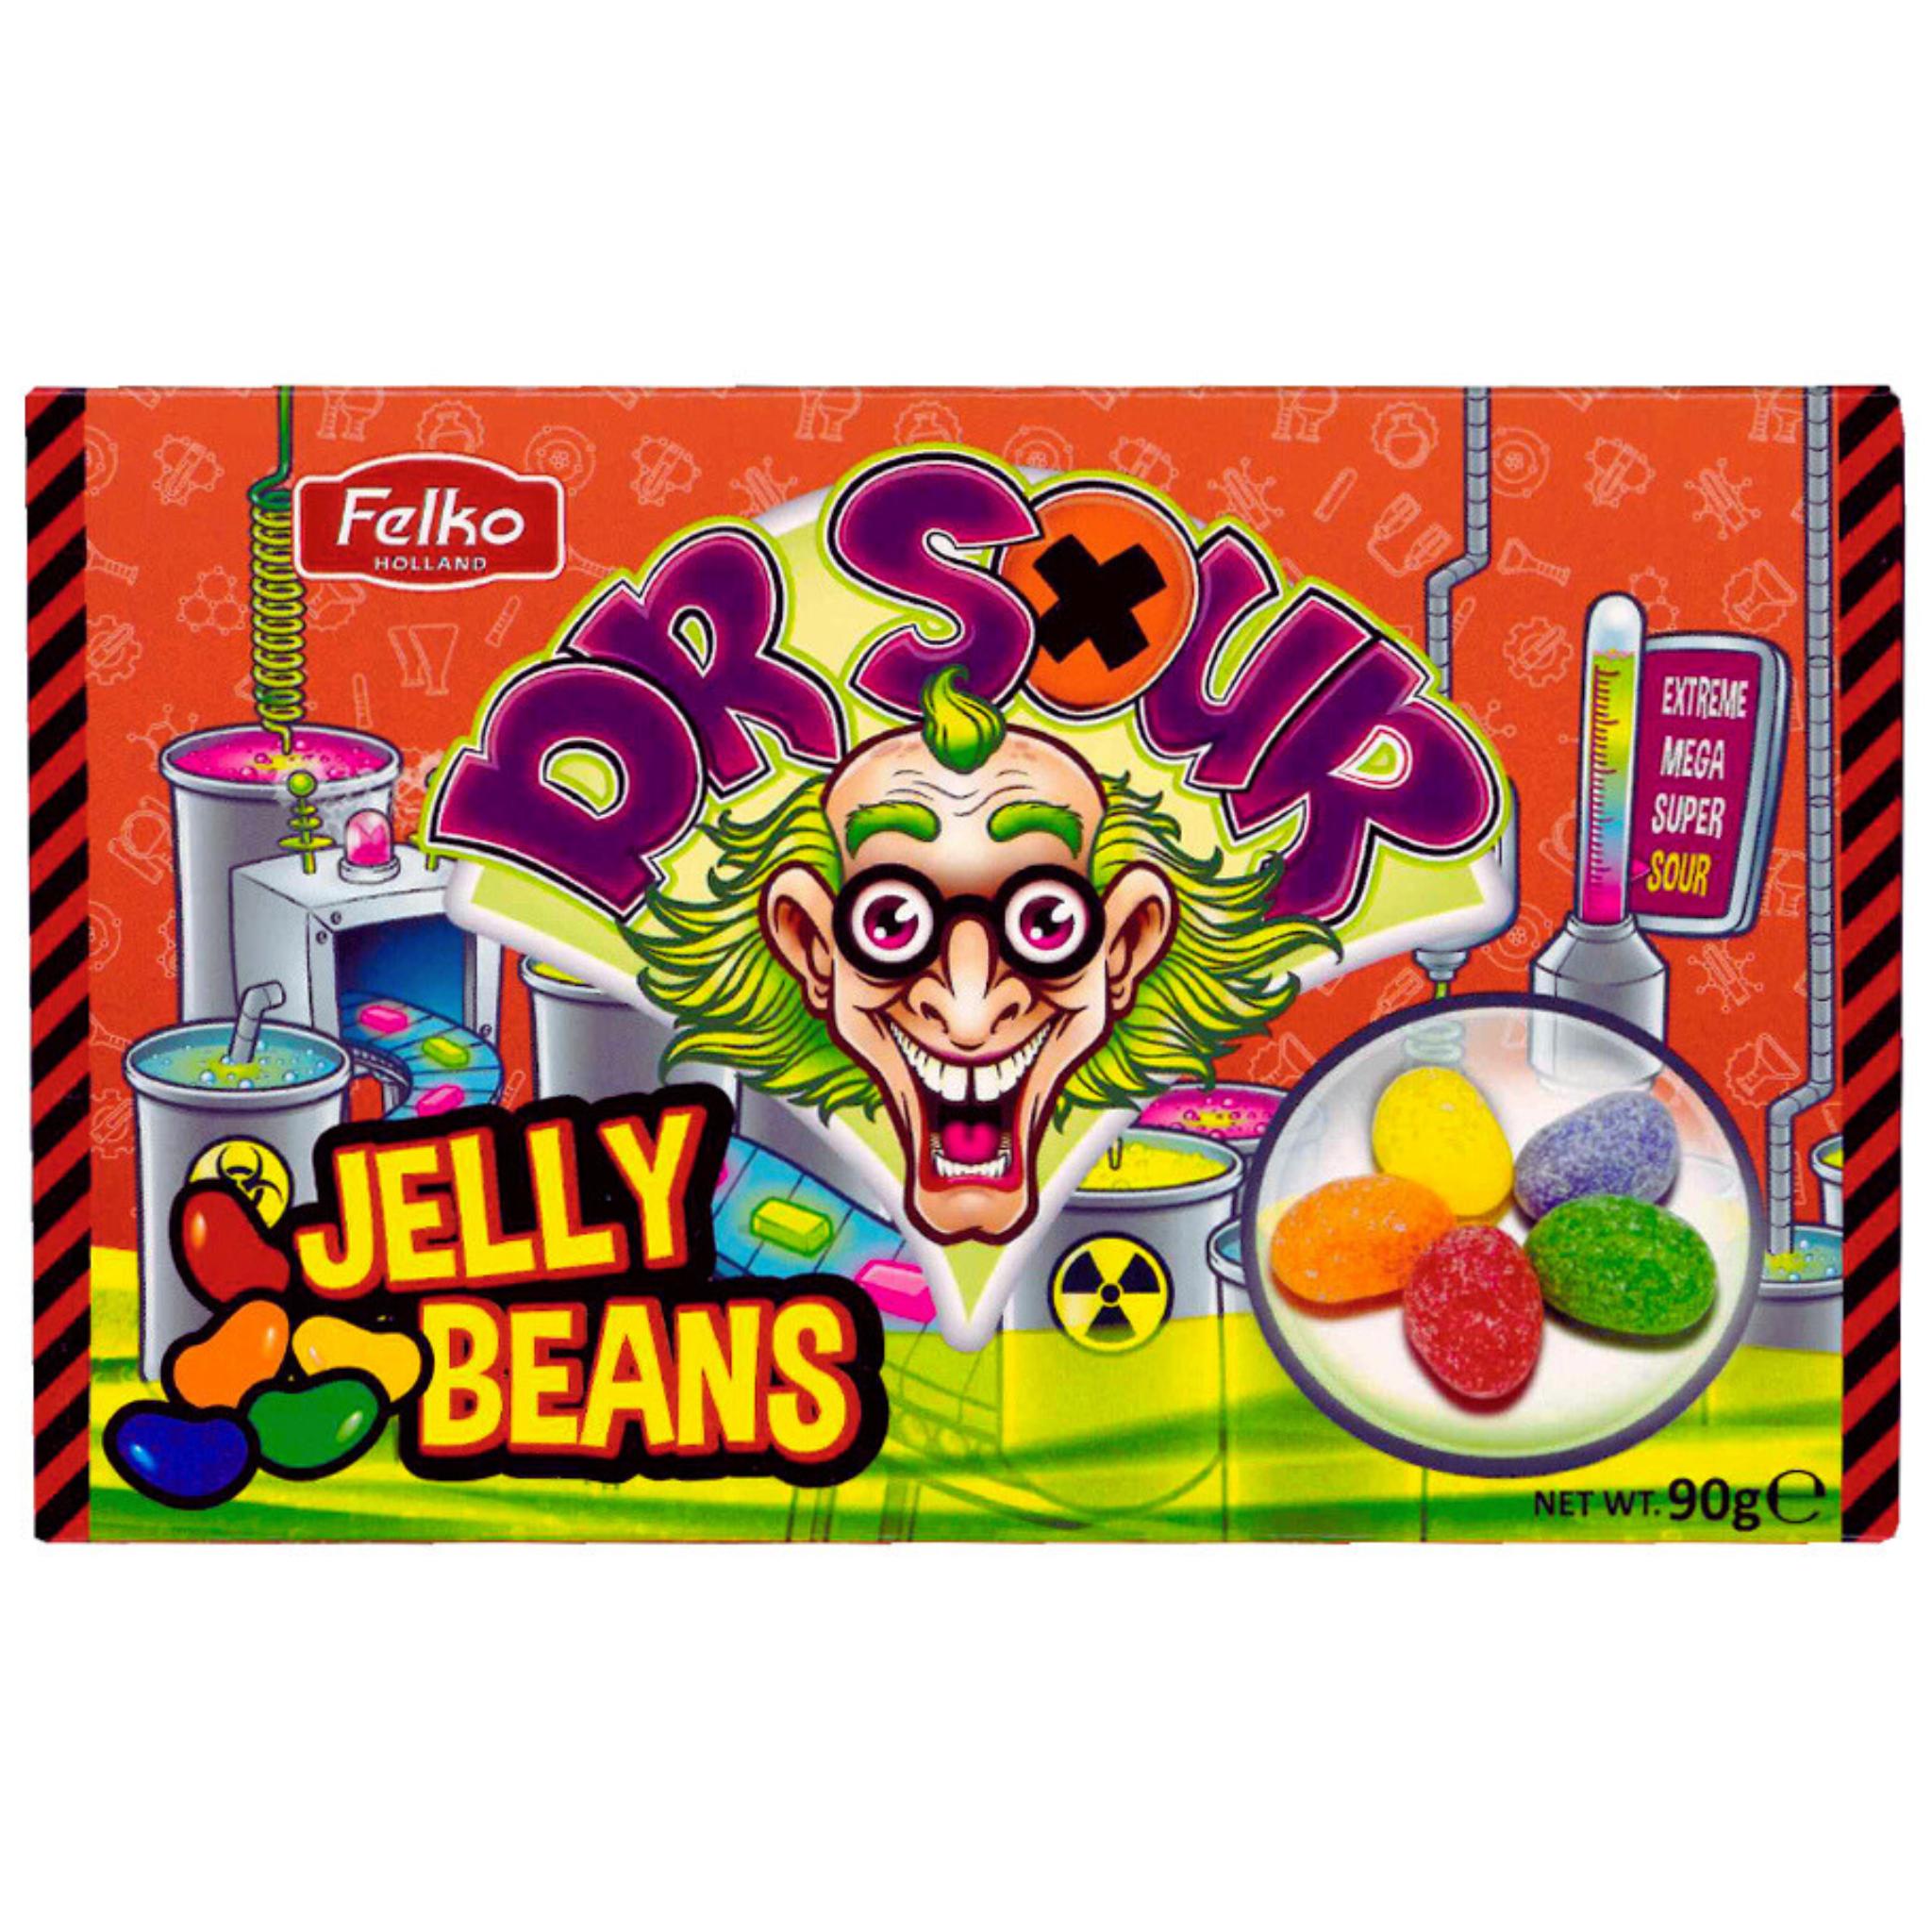 Dr. Sour Jelly Beans - 90g